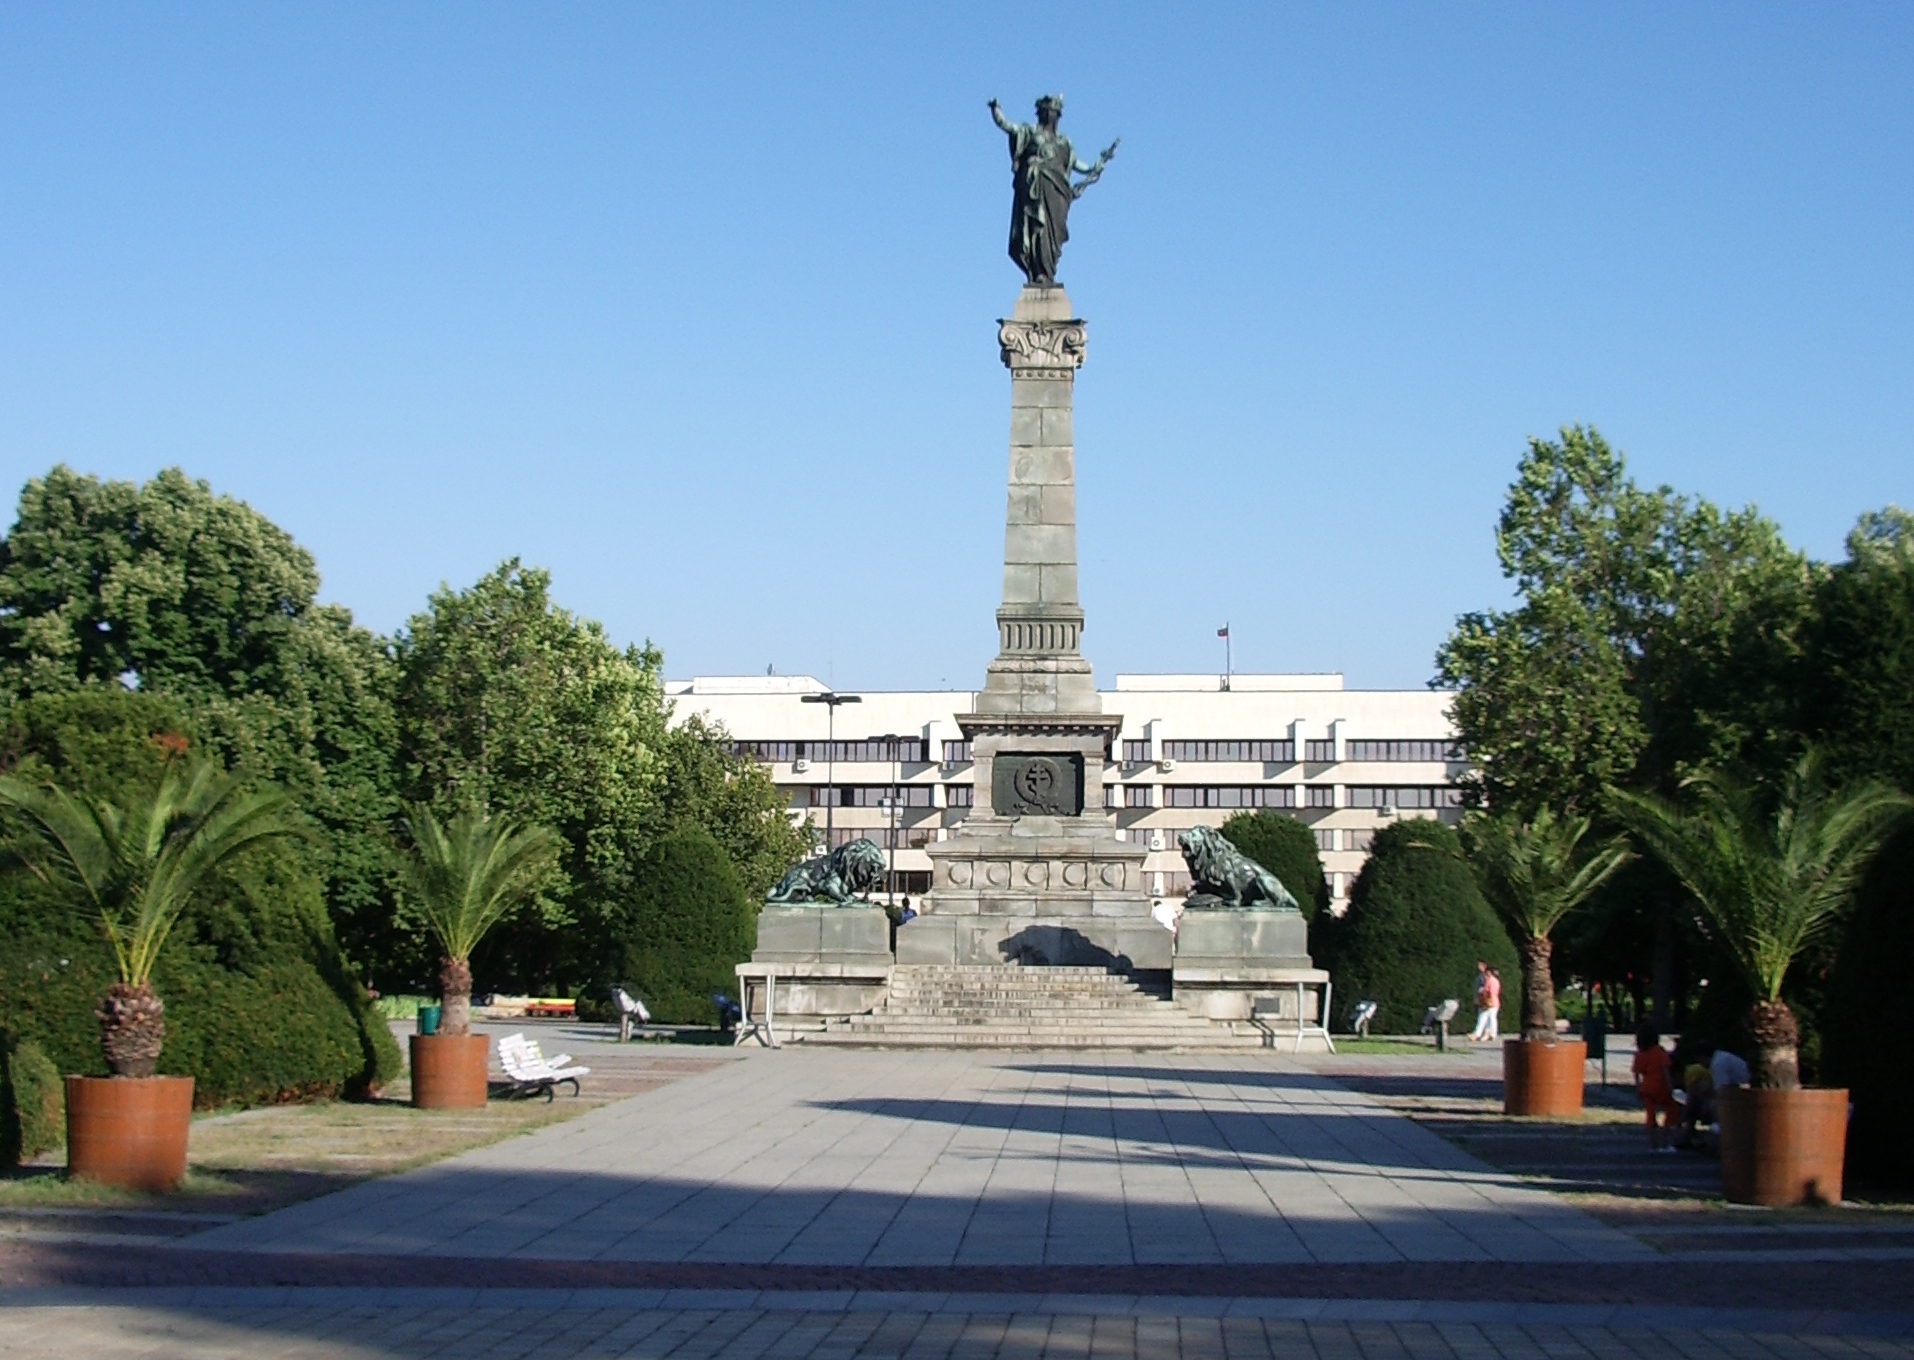 File:Rousse Monument of Liberty Palm trees.jpg - Wikimedia Commons